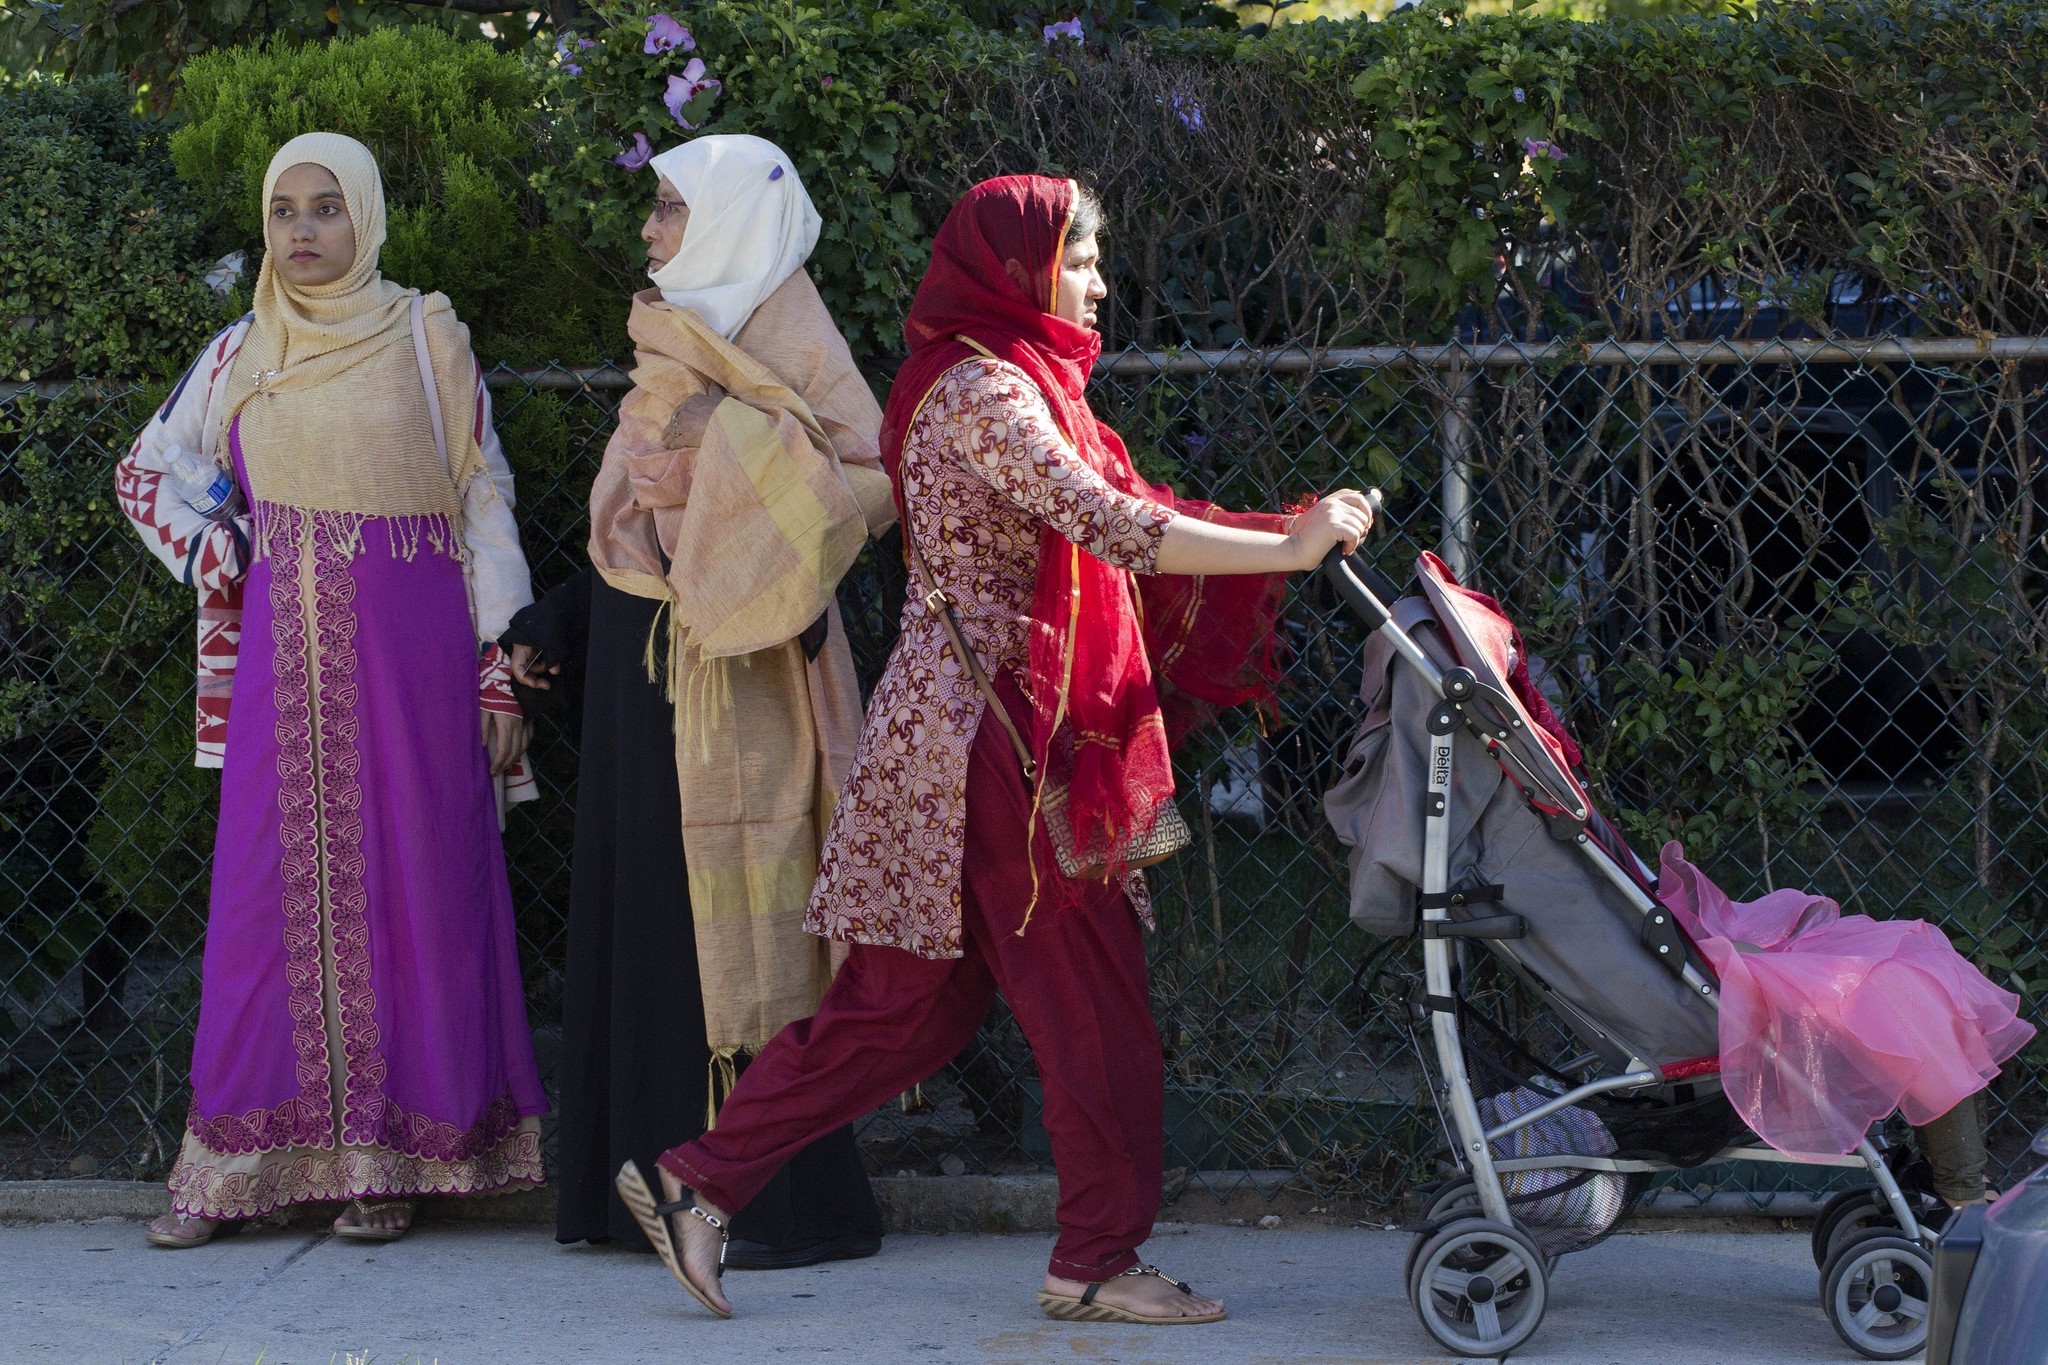 Muslim women experience thinly veiled discrimination 